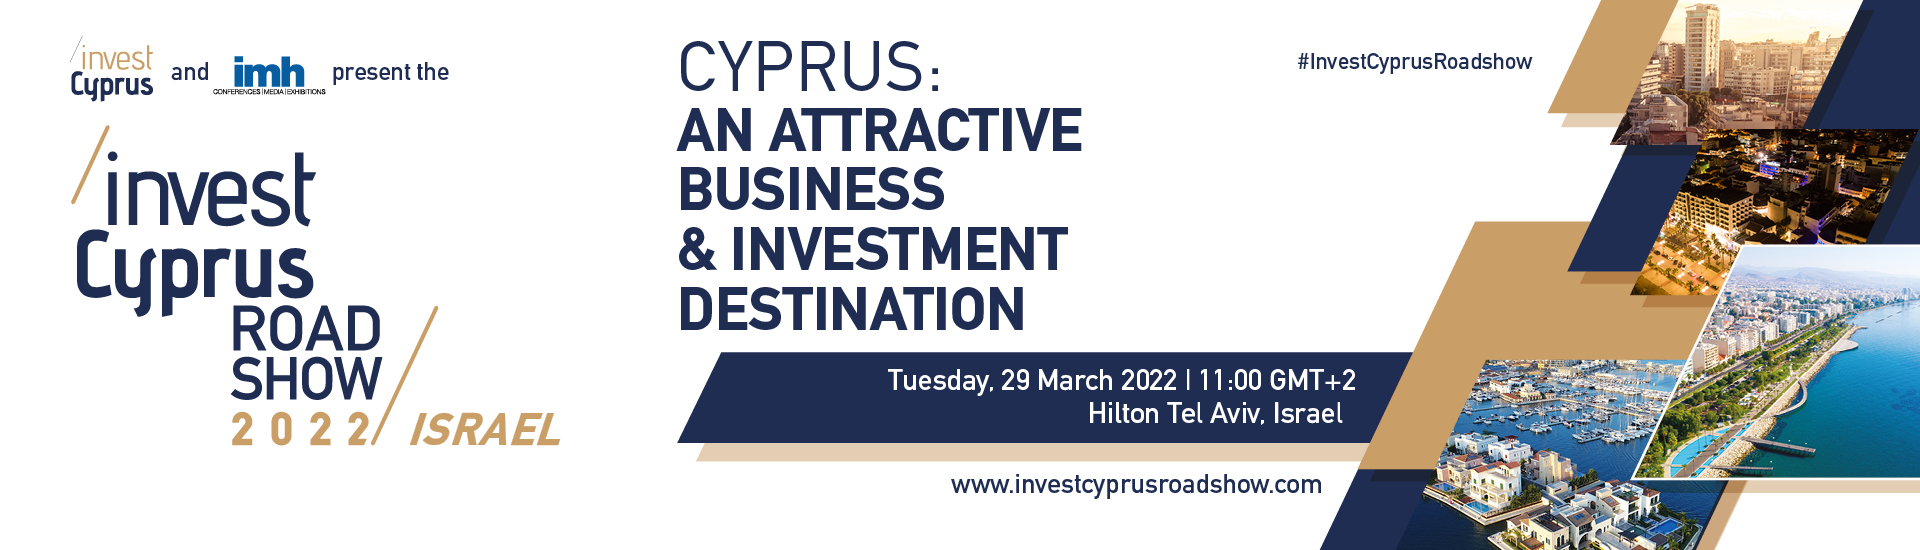 Invest Cyprus, IMH